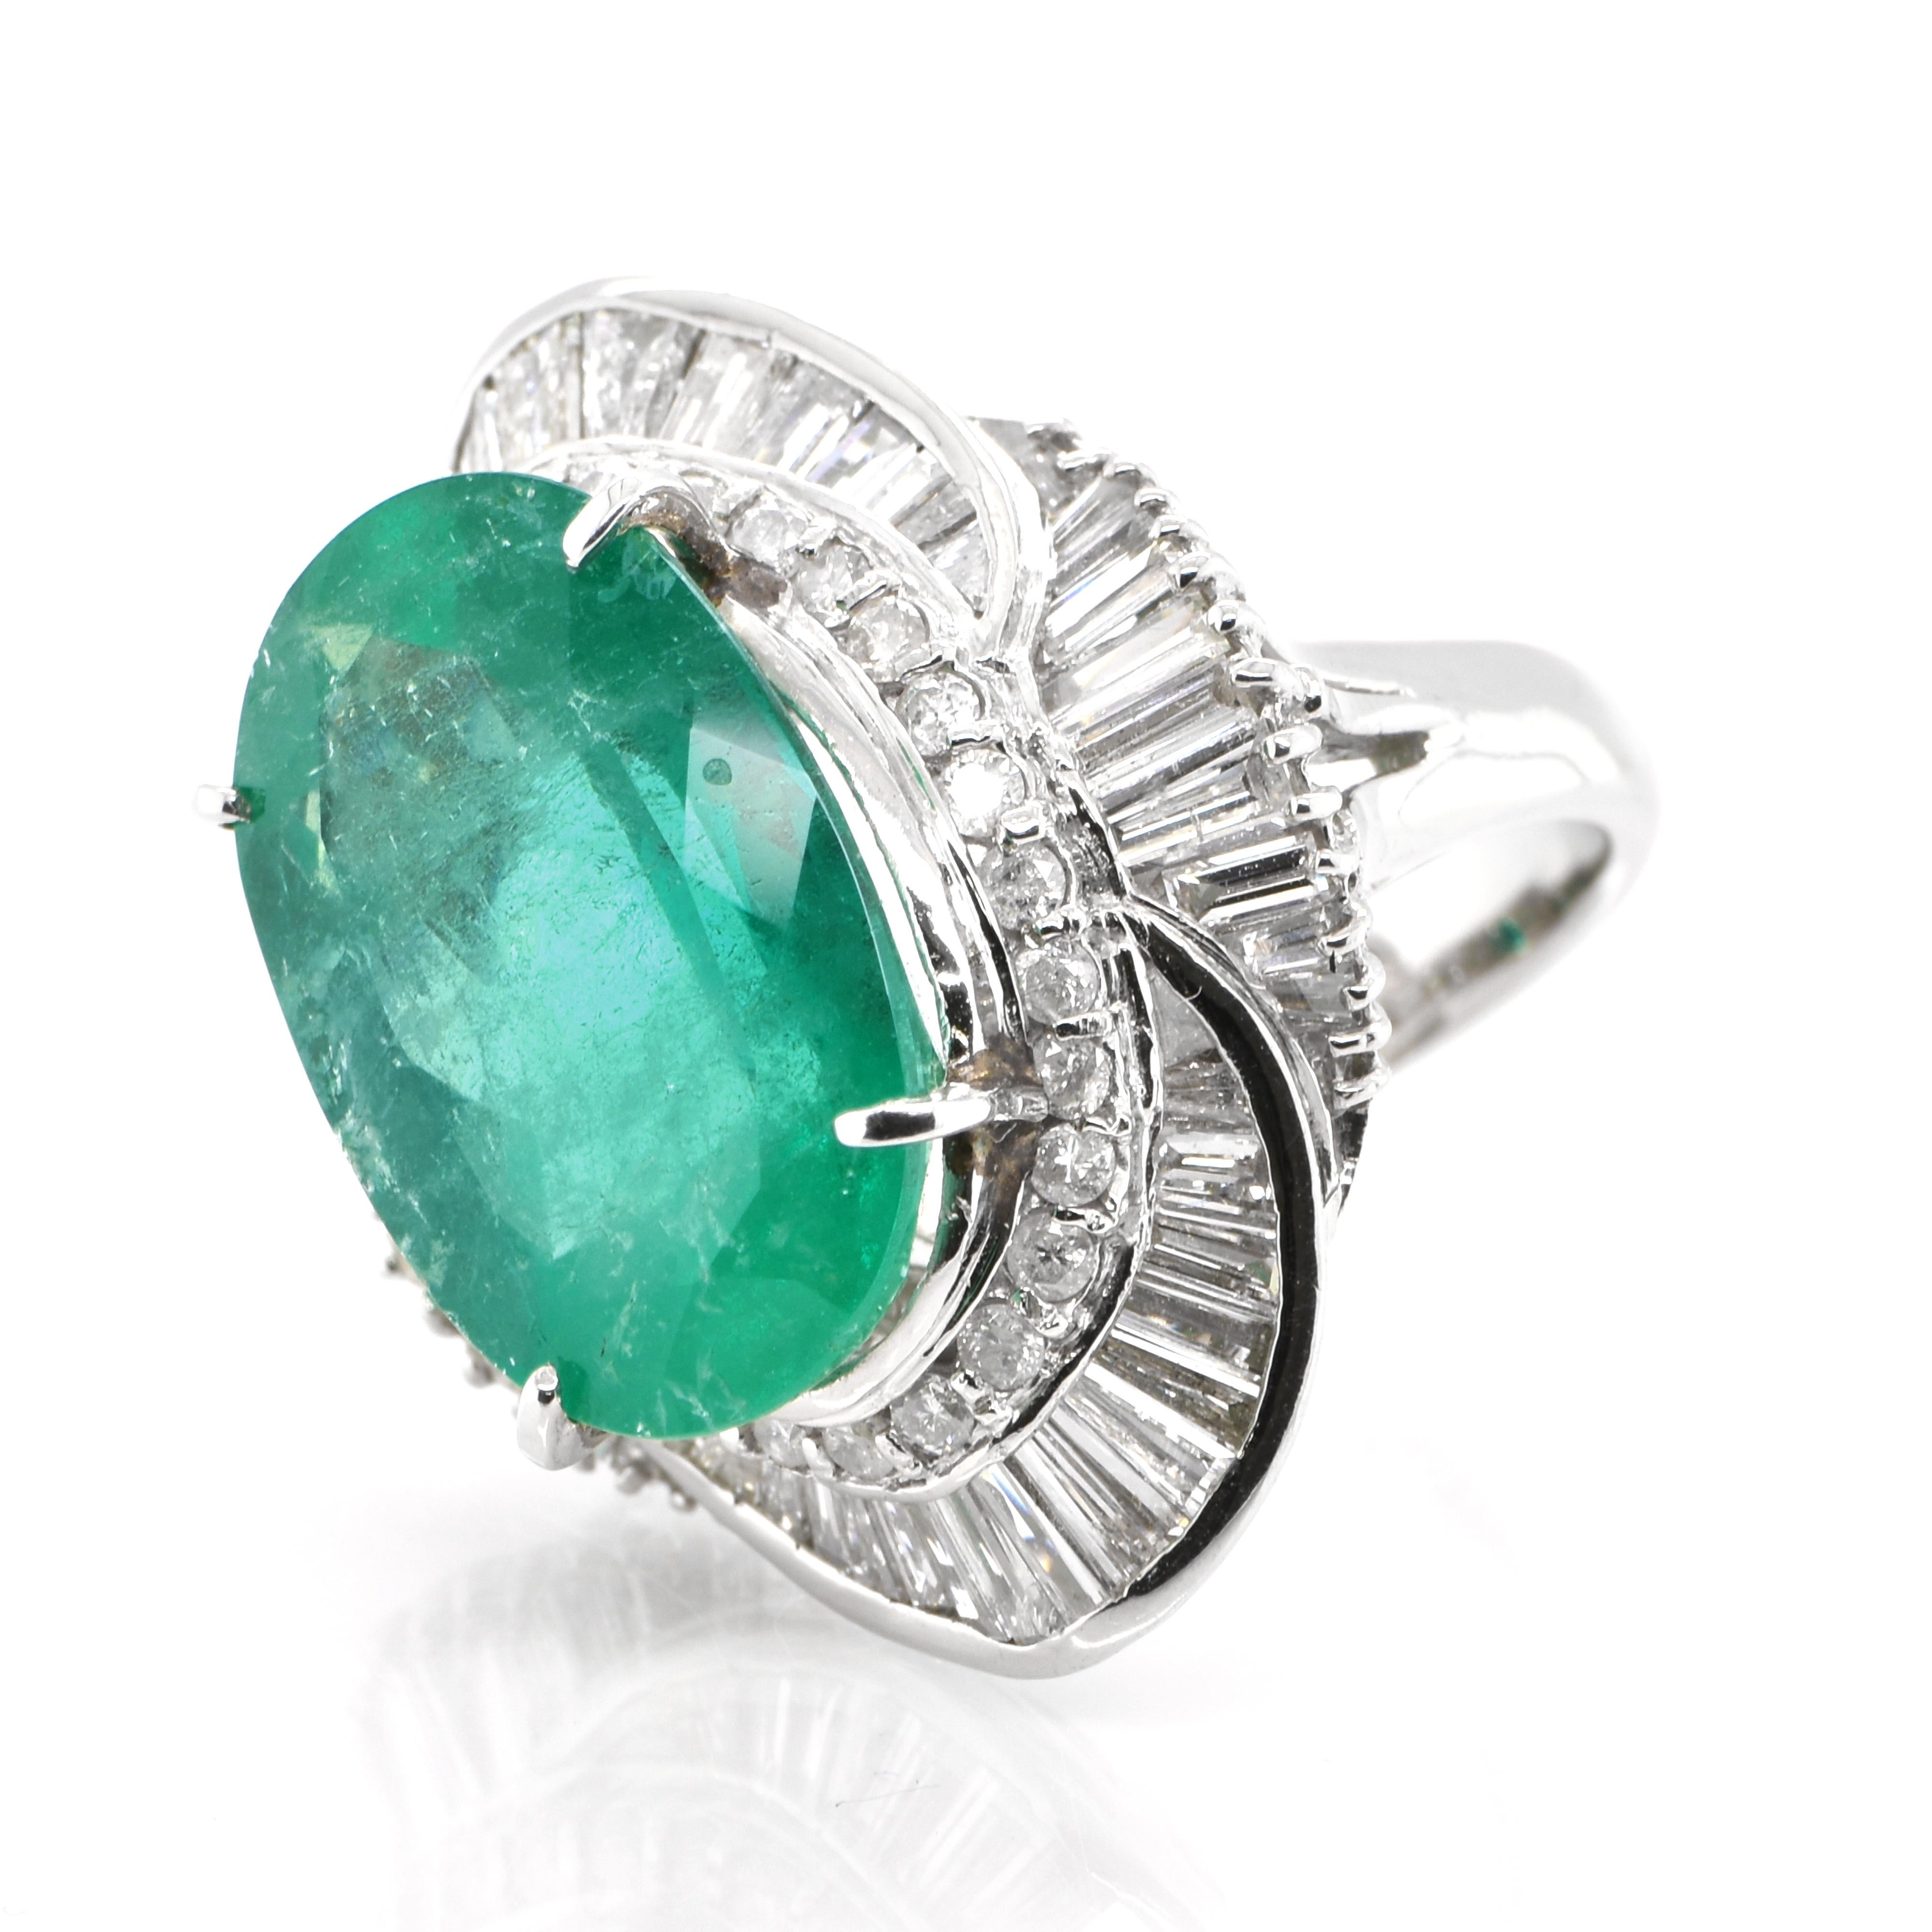 A stunning ring featuring a 12.81 Carat Natural Emerald and 2.72 Carats of Diamond Accents set in Platinum. People have admired emerald’s green for thousands of years. Emeralds have always been associated with the lushest landscapes and the richest